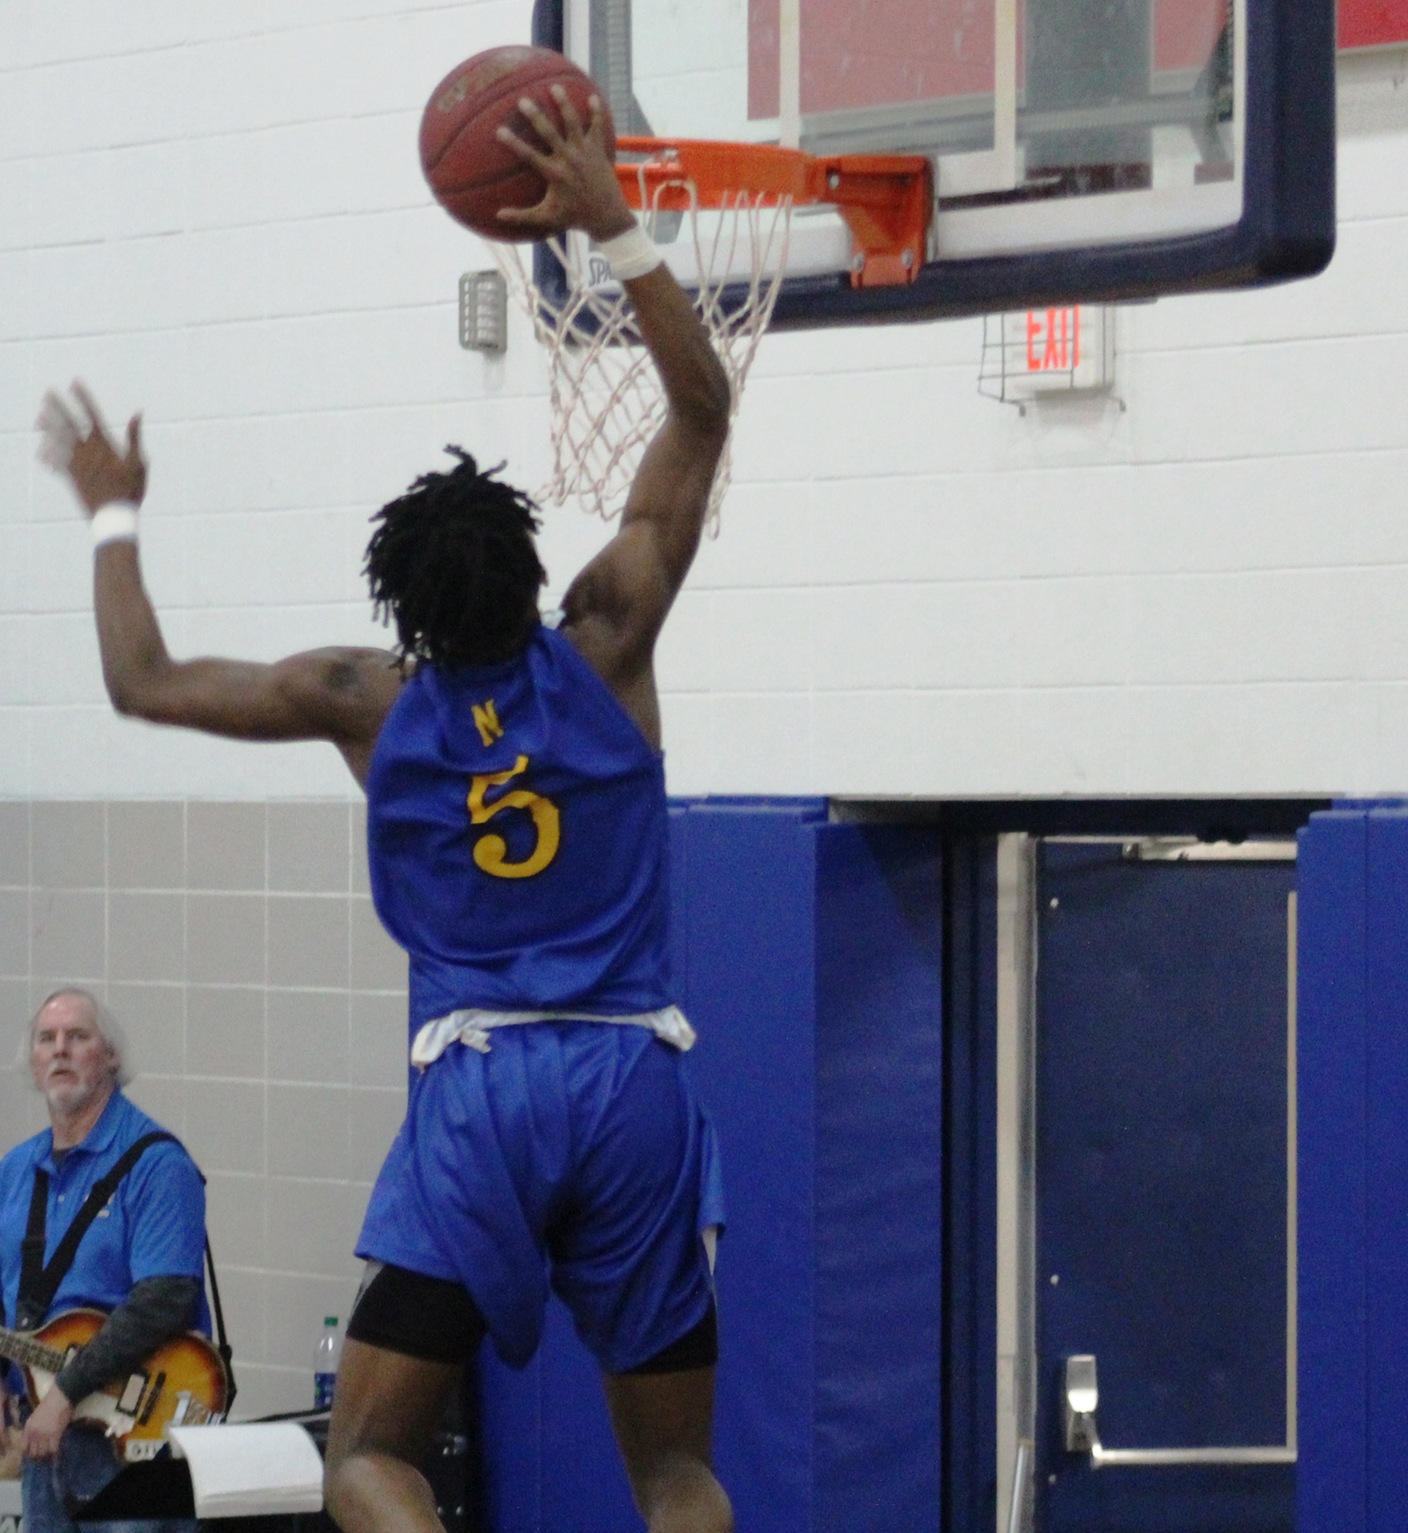 Quentin Hardrict dunks for 2 of his career-high 37 points in Wednesday's win over DMACC.